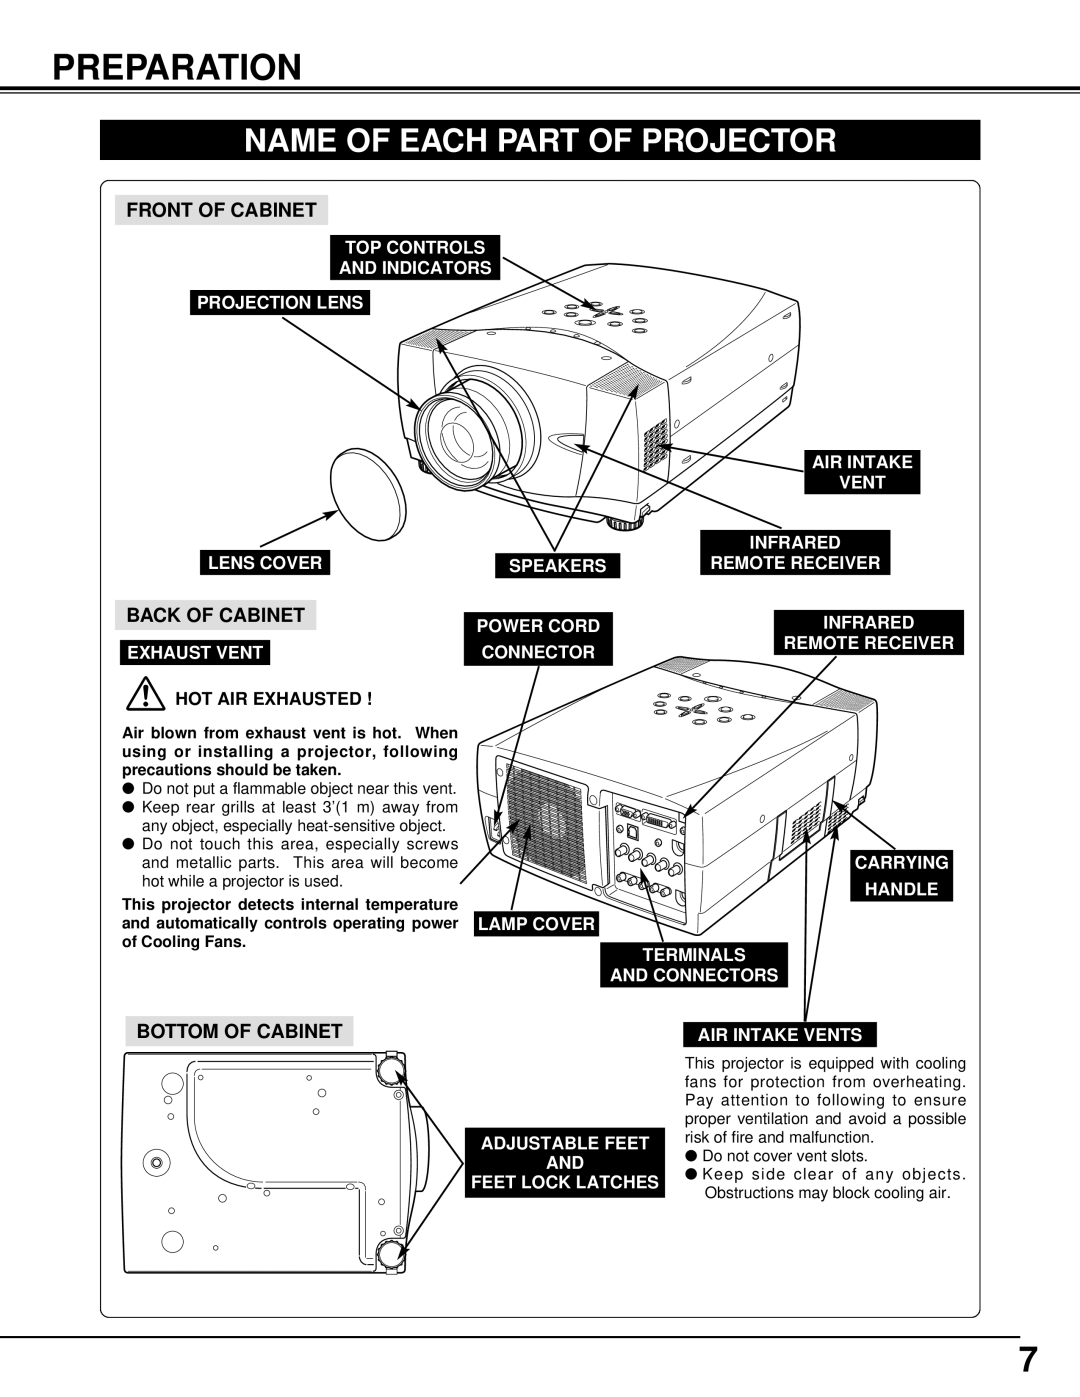 BOXLIGHT MP-41T manual Preparation, Name Of Each Part Of Projector, Front Of Cabinet, Back Of Cabinet, Bottom Of Cabinet 